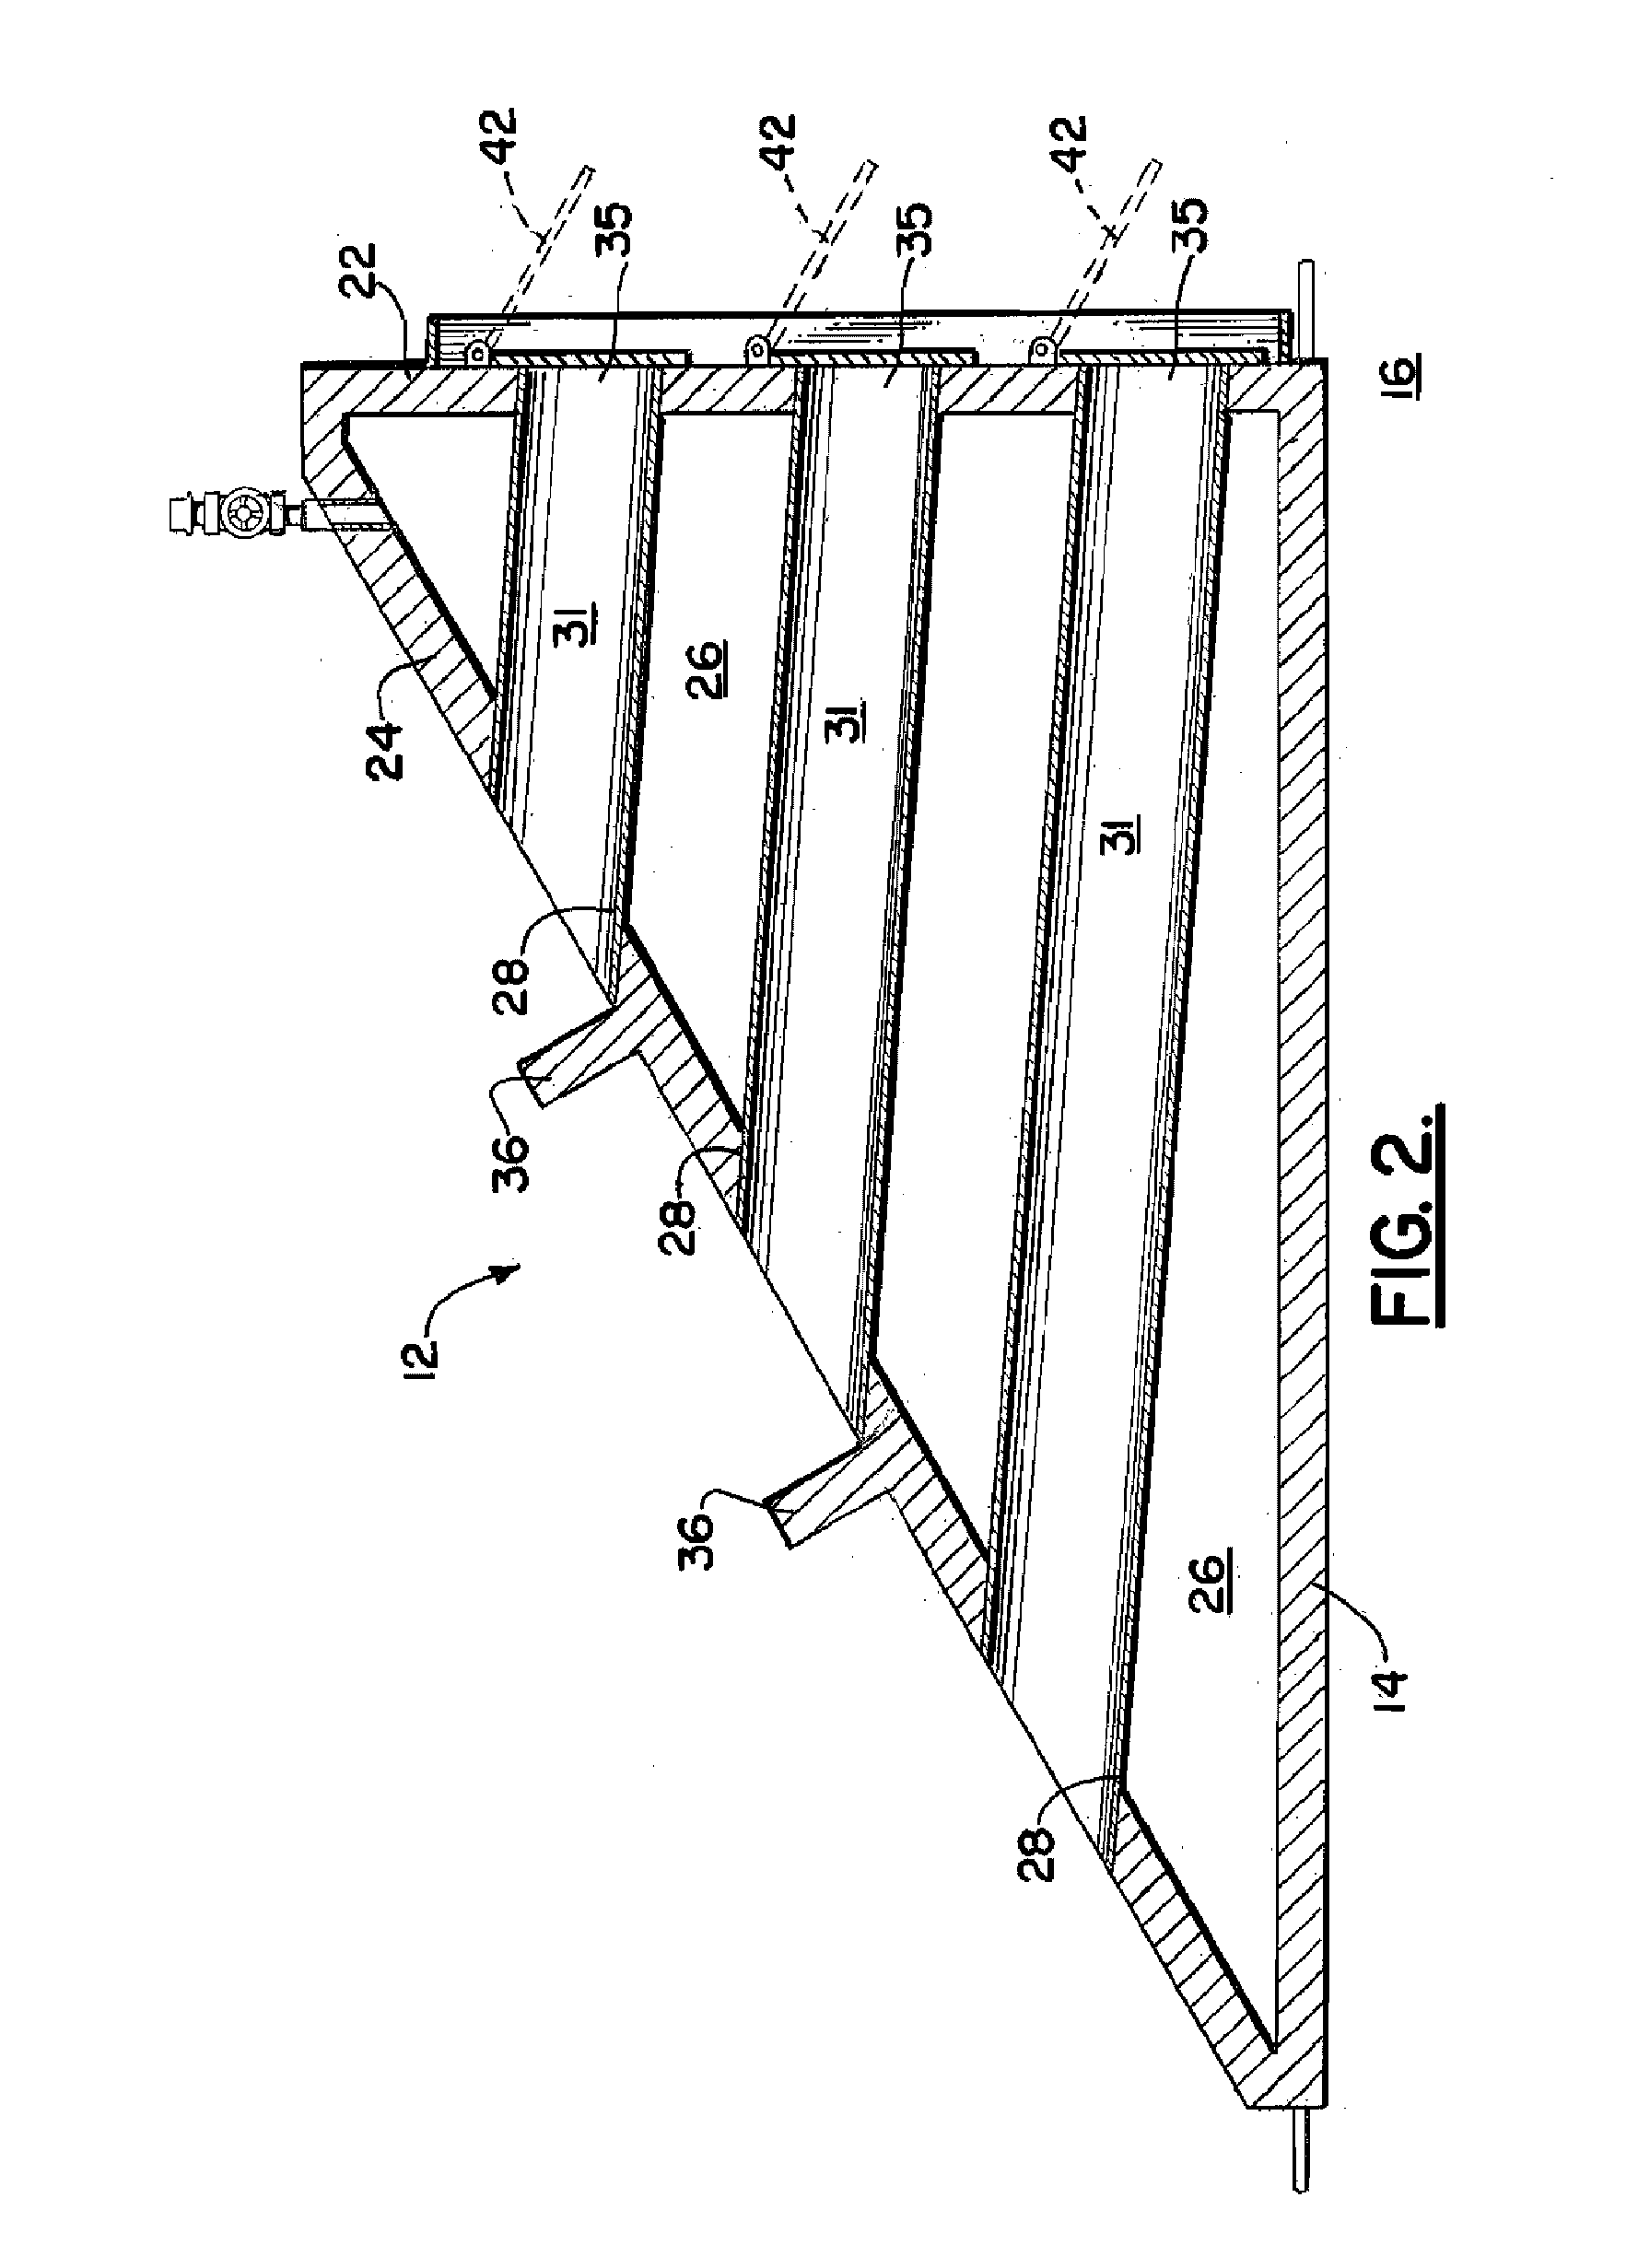 Wave Suppressor and Sediment Collection System